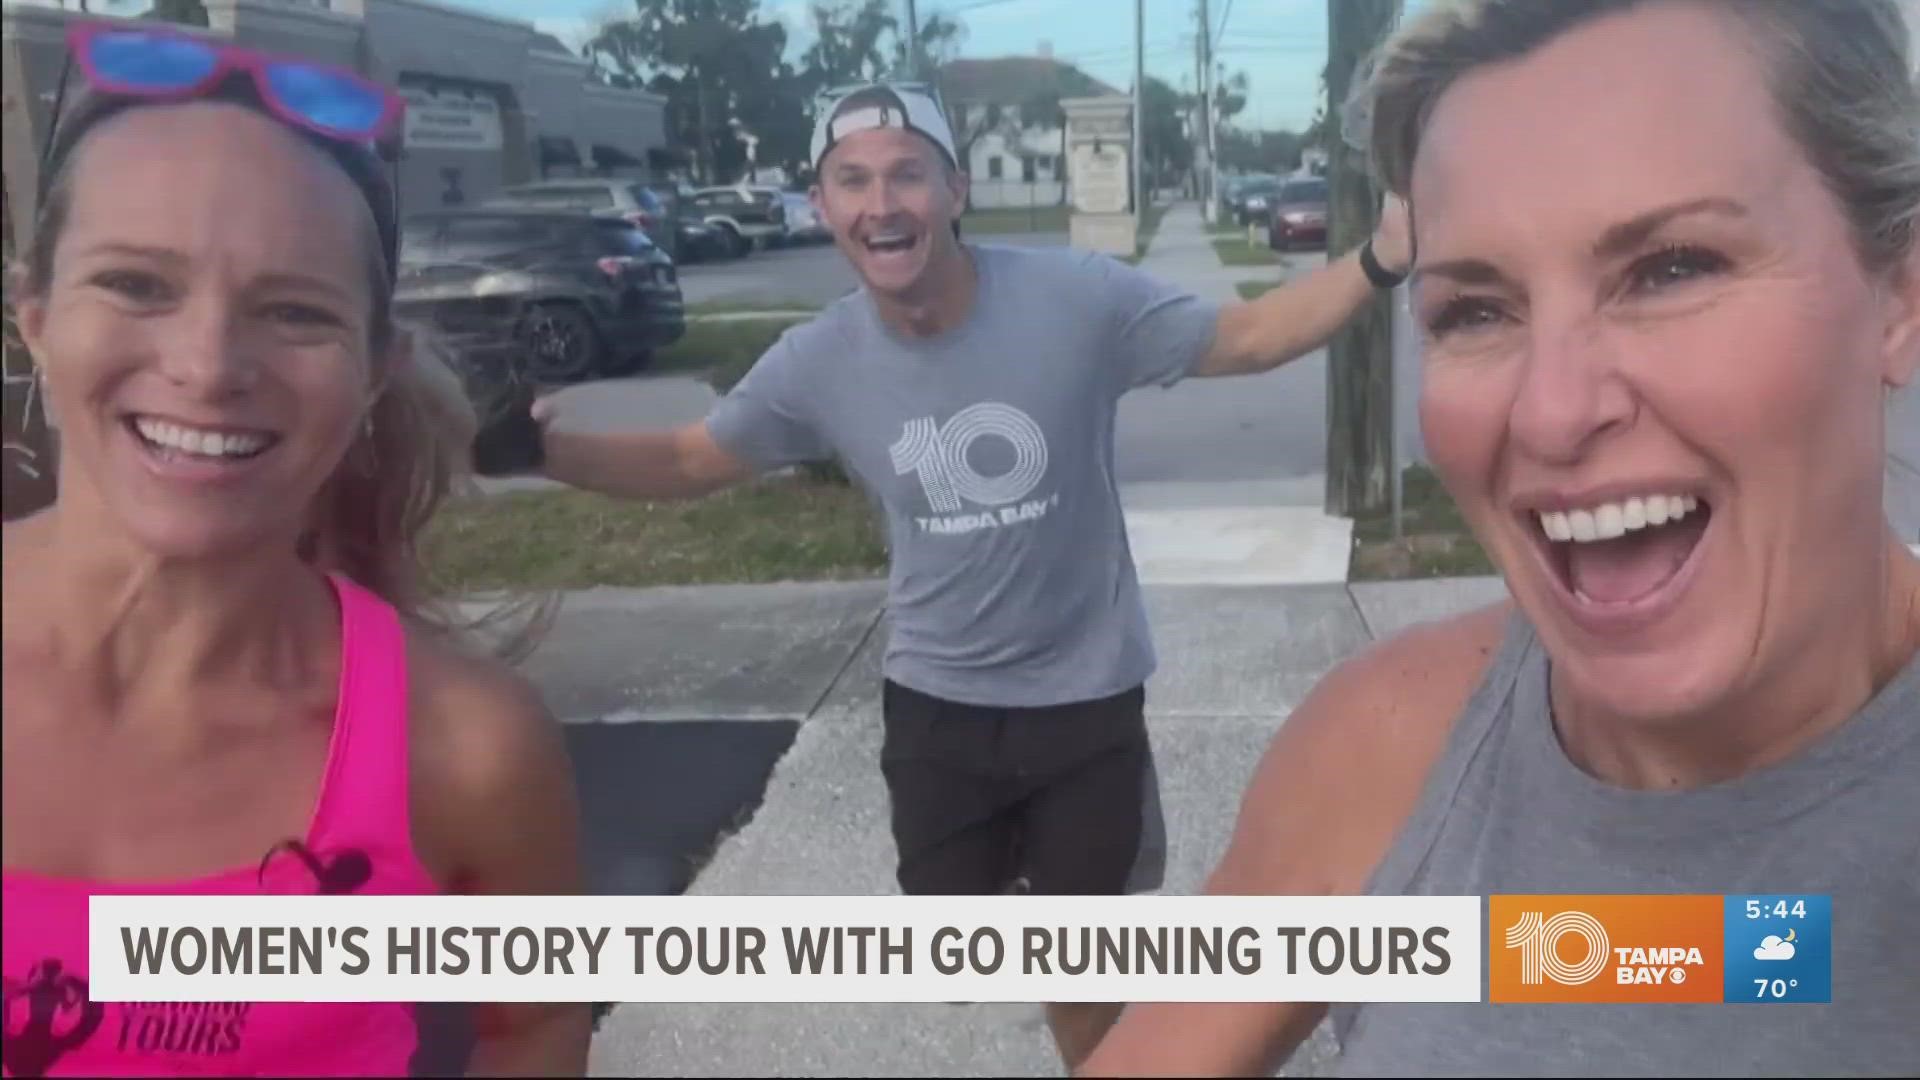 A unique running tour takes you through South Tampa and Bayshore to learn about some history-making women in Tampa.